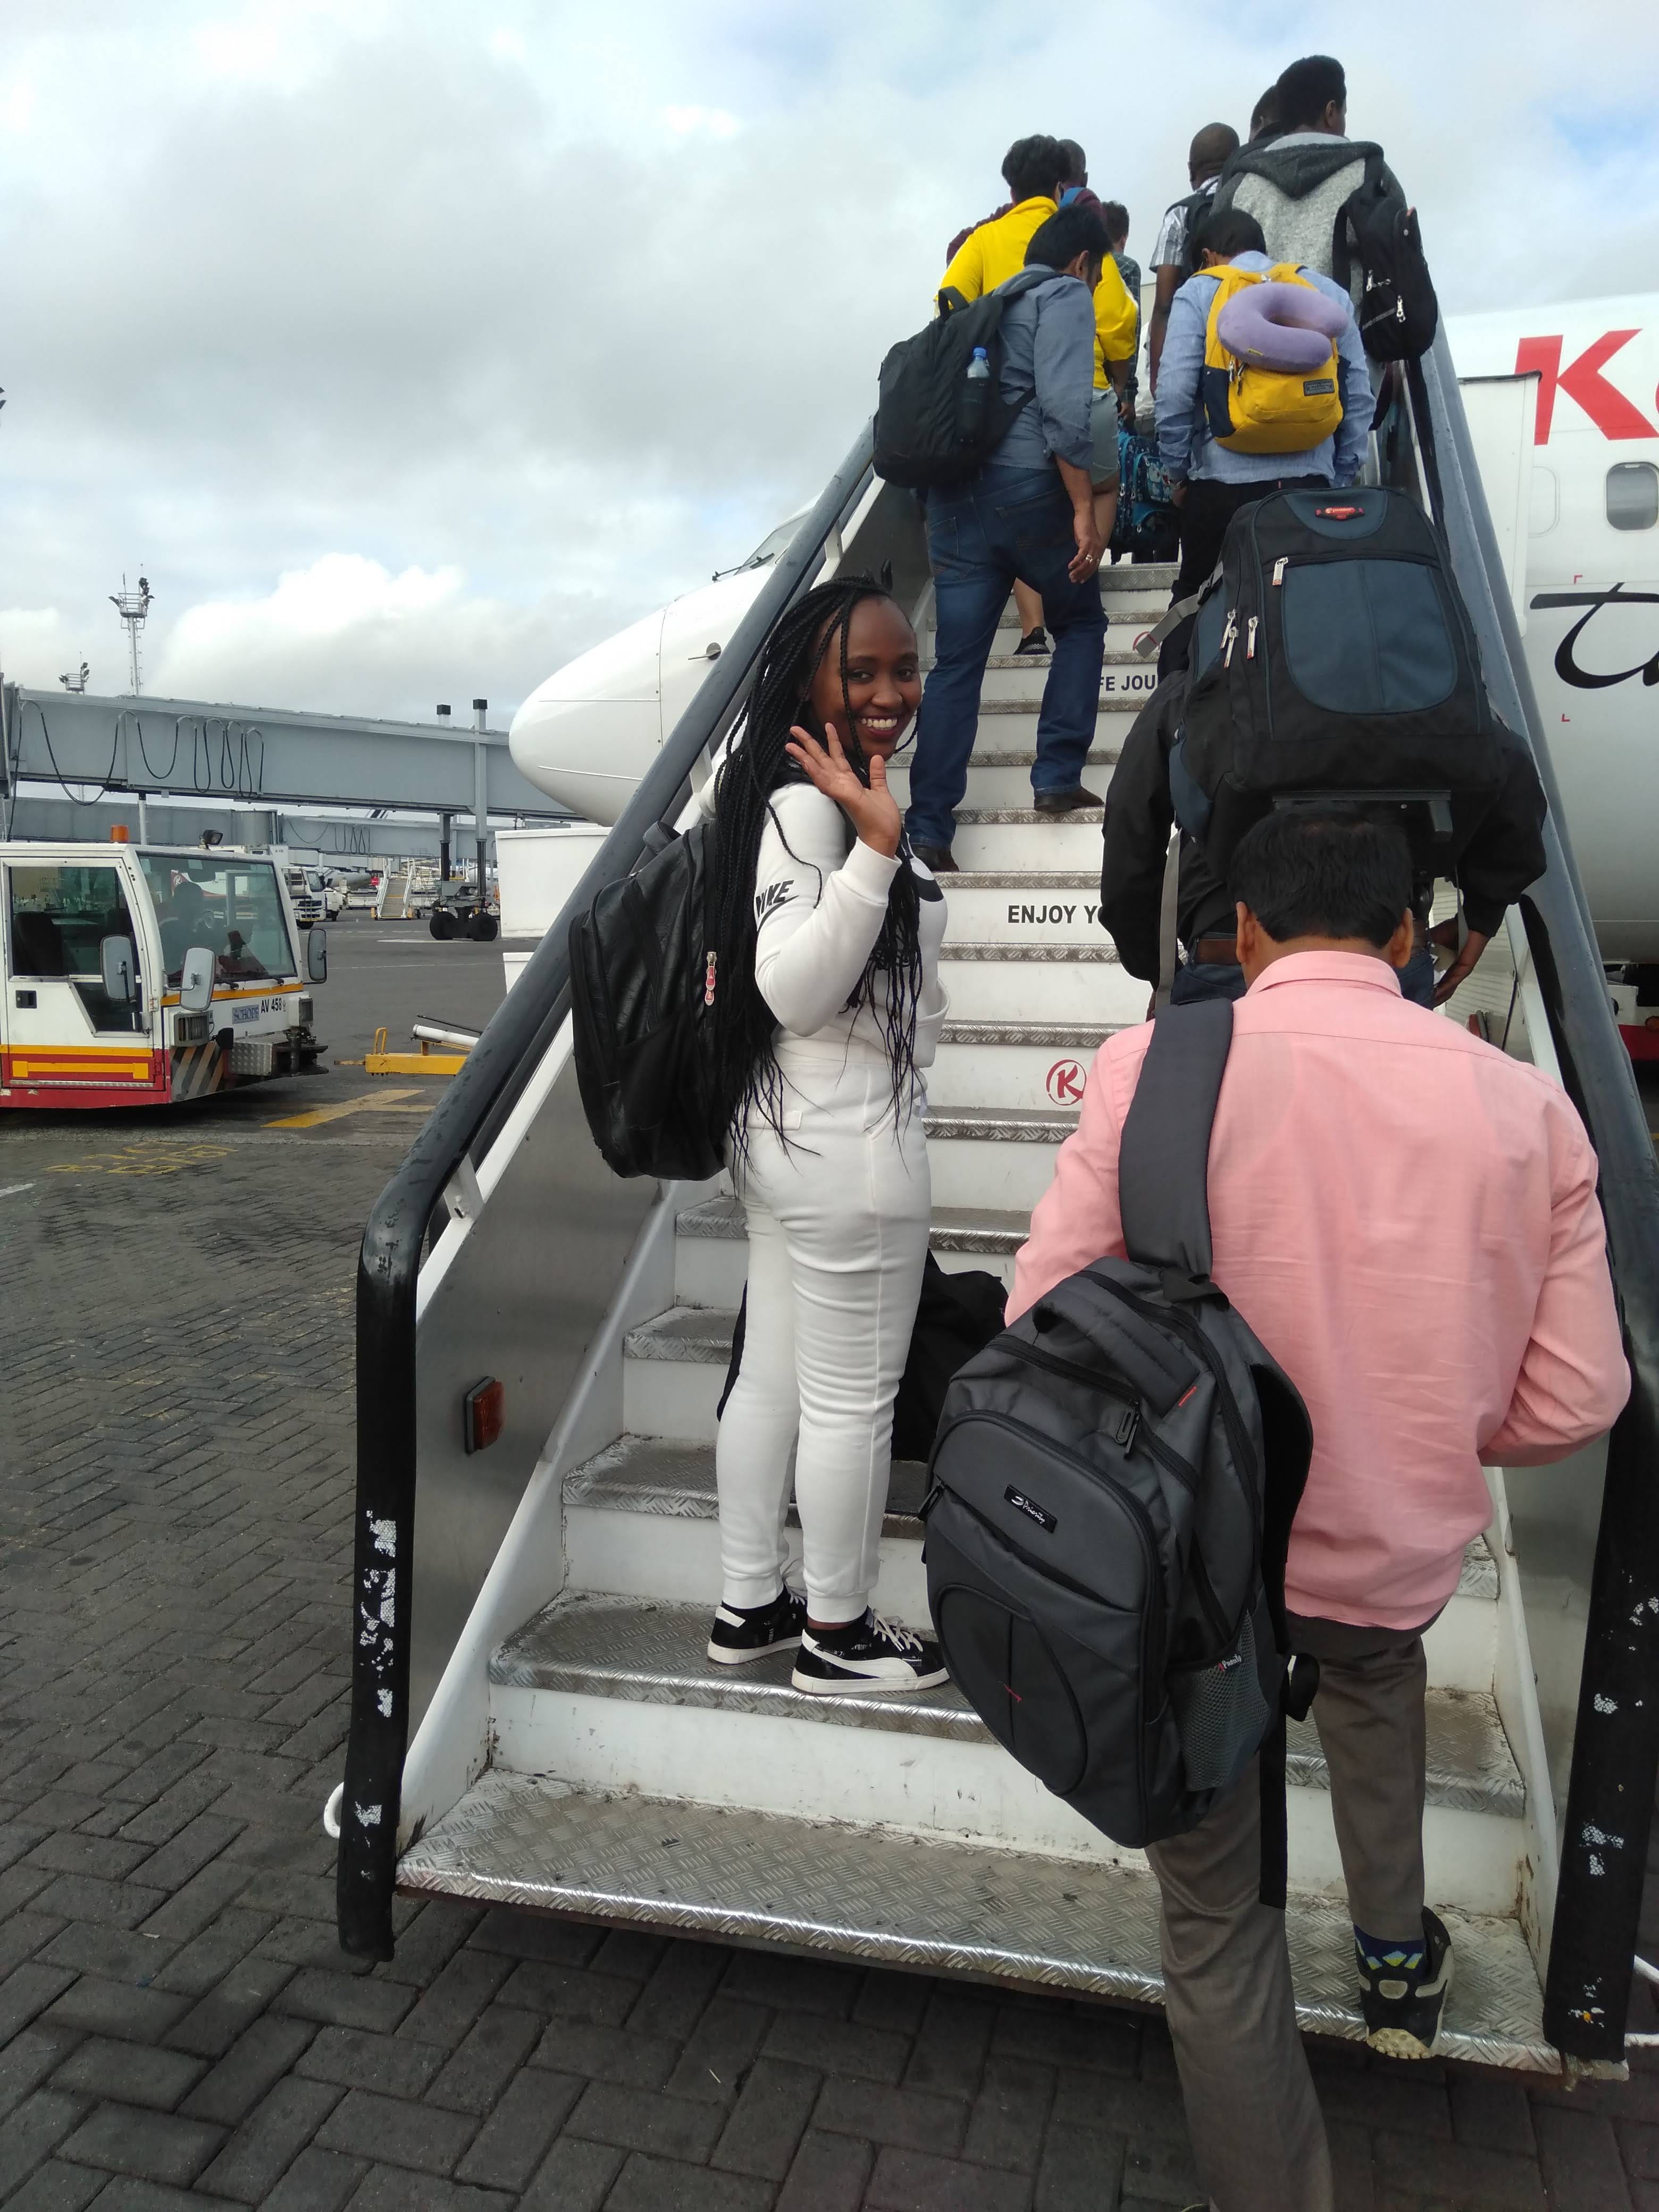 Leaving Kenya to attend the Summit in Ghana. I was really happy.